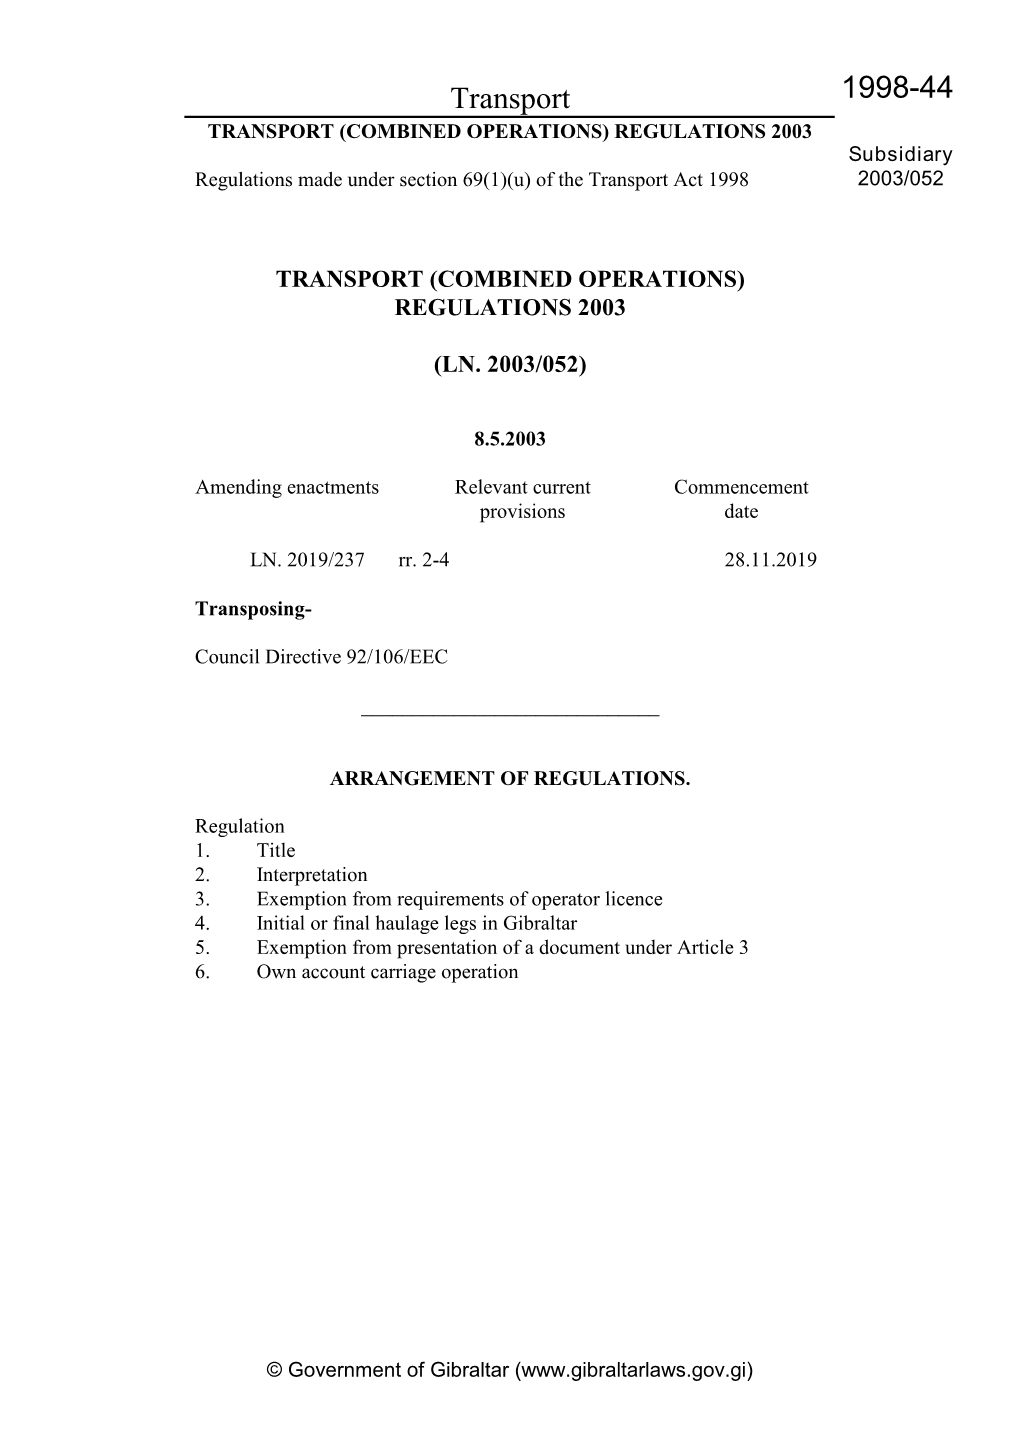 Transport 1998-44 TRANSPORT (COMBINED OPERATIONS) REGULATIONS 2003 Subsidiary Regulations Made Under Section 69(1)(U) of the Transport Act 1998 2003/052